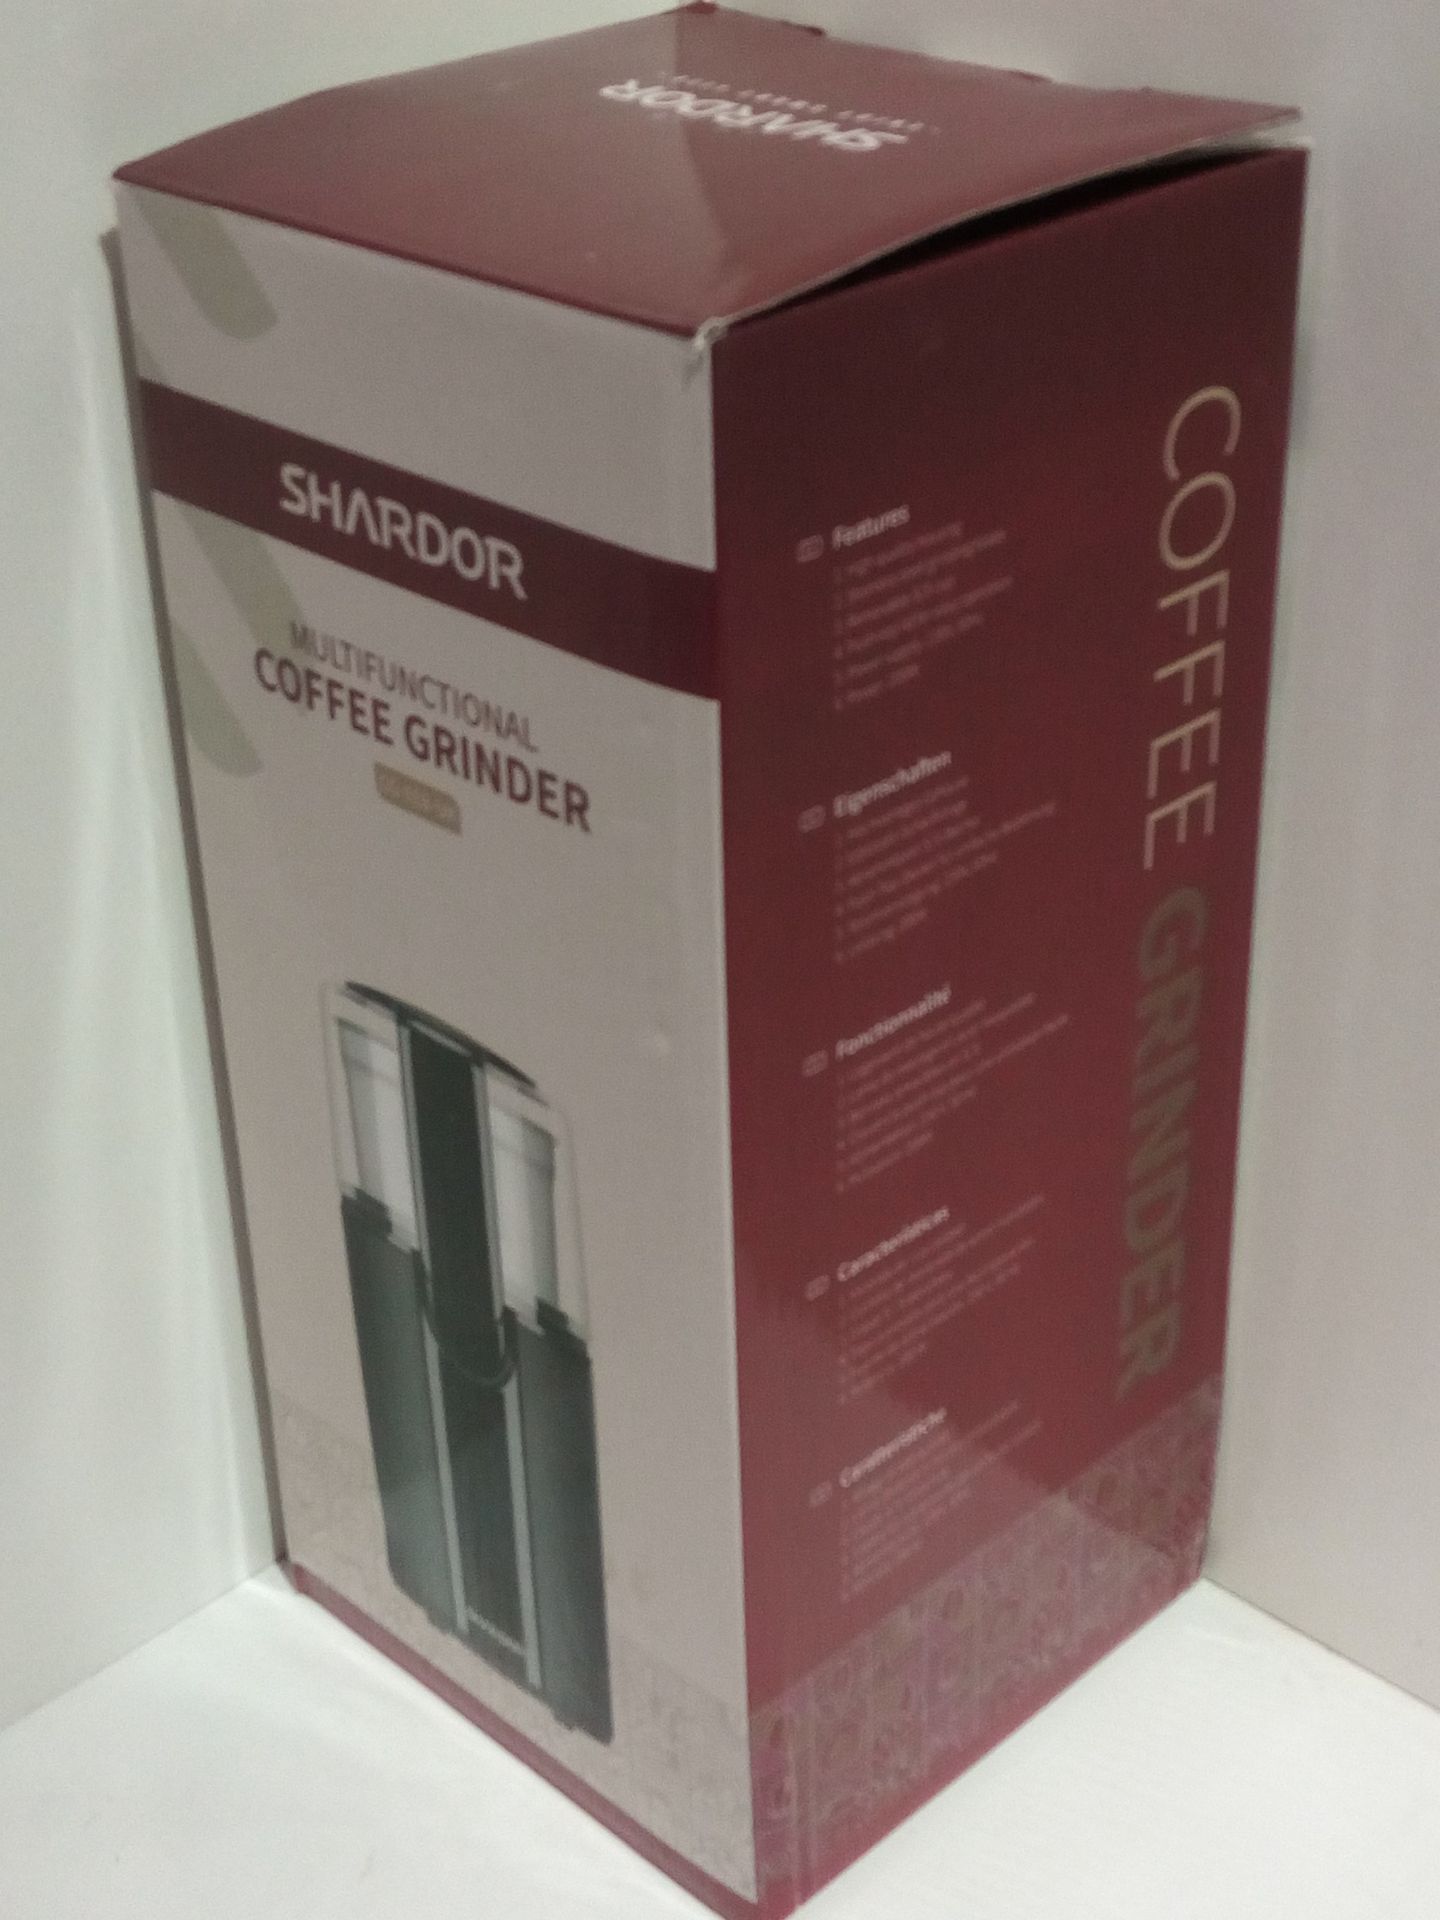 RRP £24.64 SHARDOR Coffee Grinder Electric with Removable Stainless Steel Bowl - Image 2 of 2